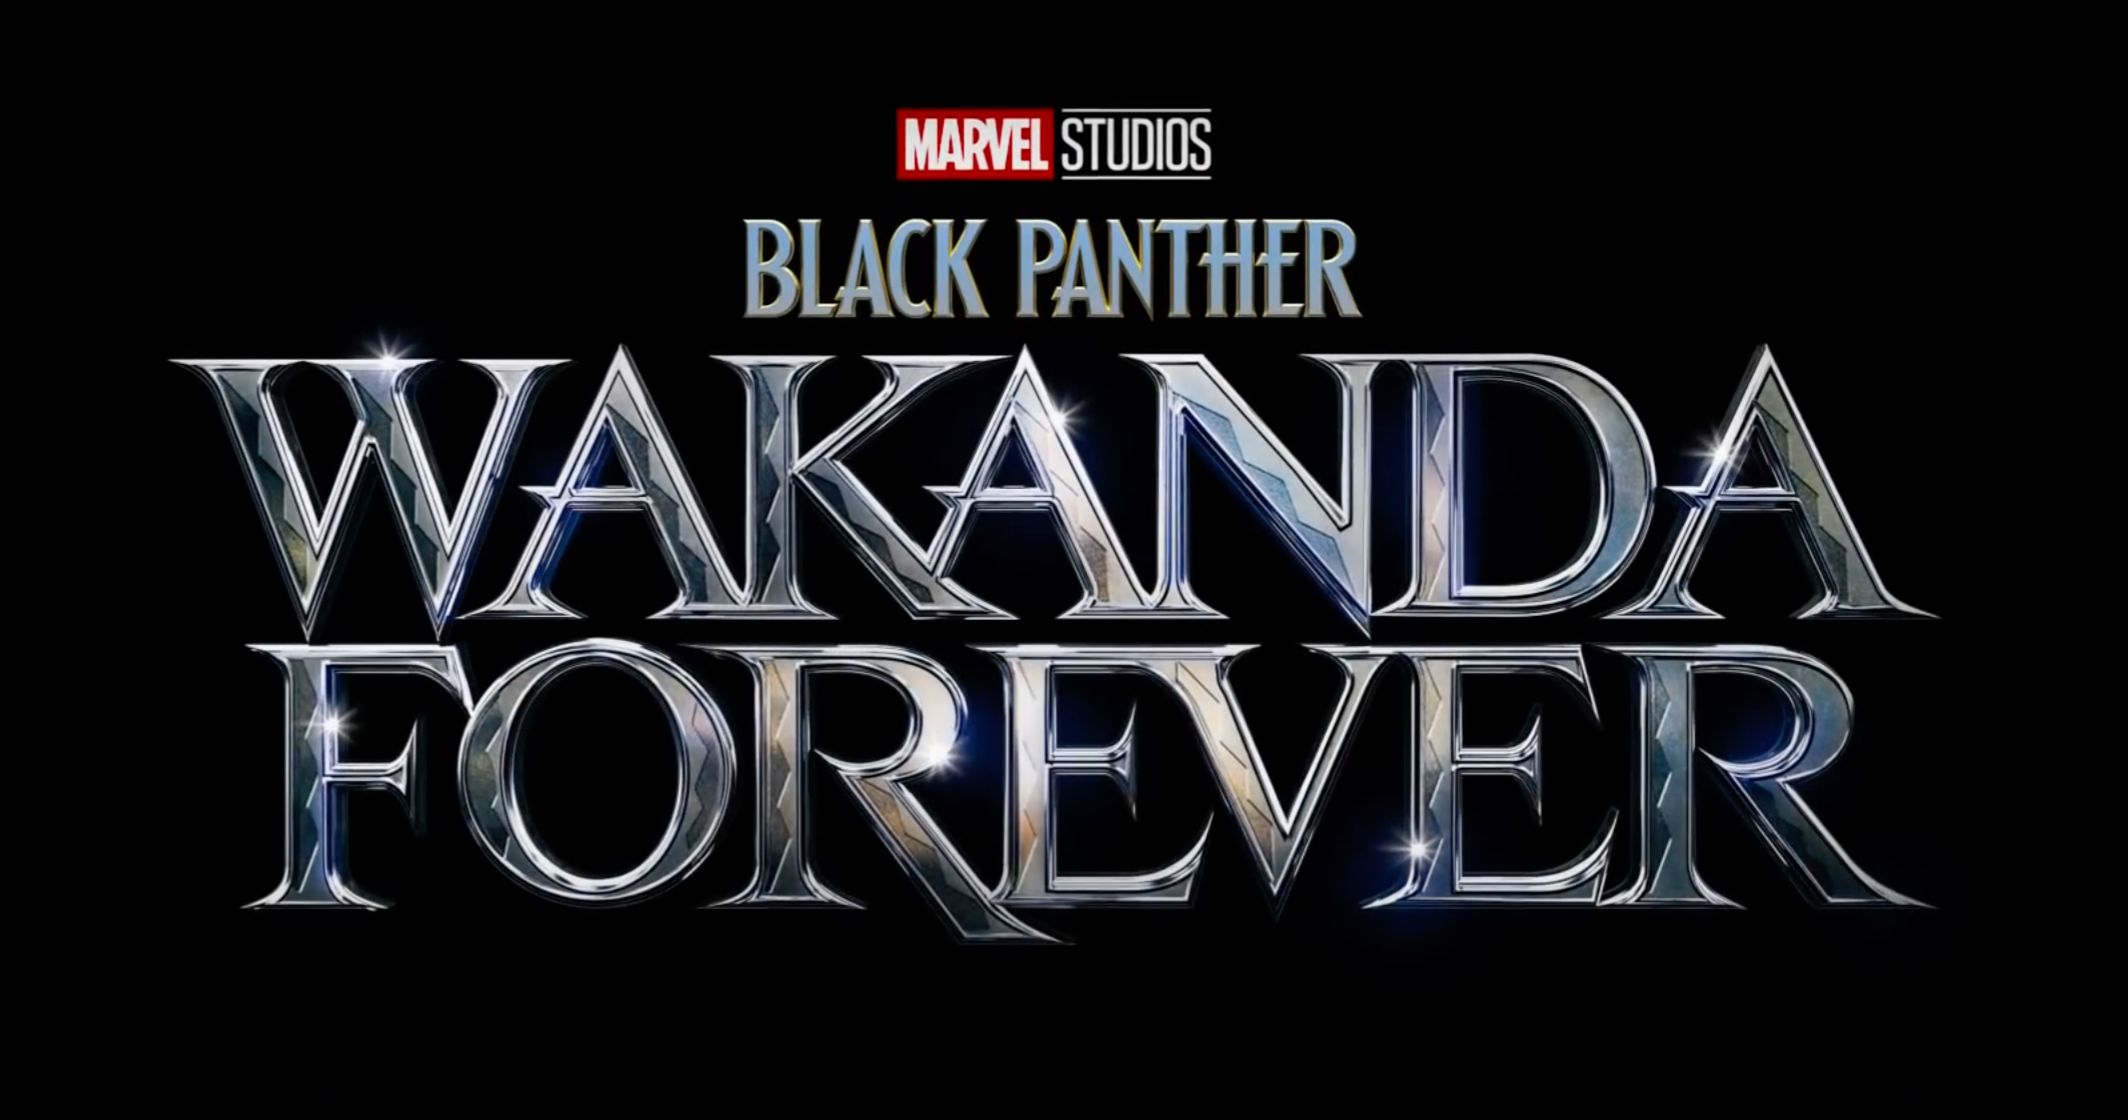 Black Panther 2 Is Officially Titled Wakanda Forever